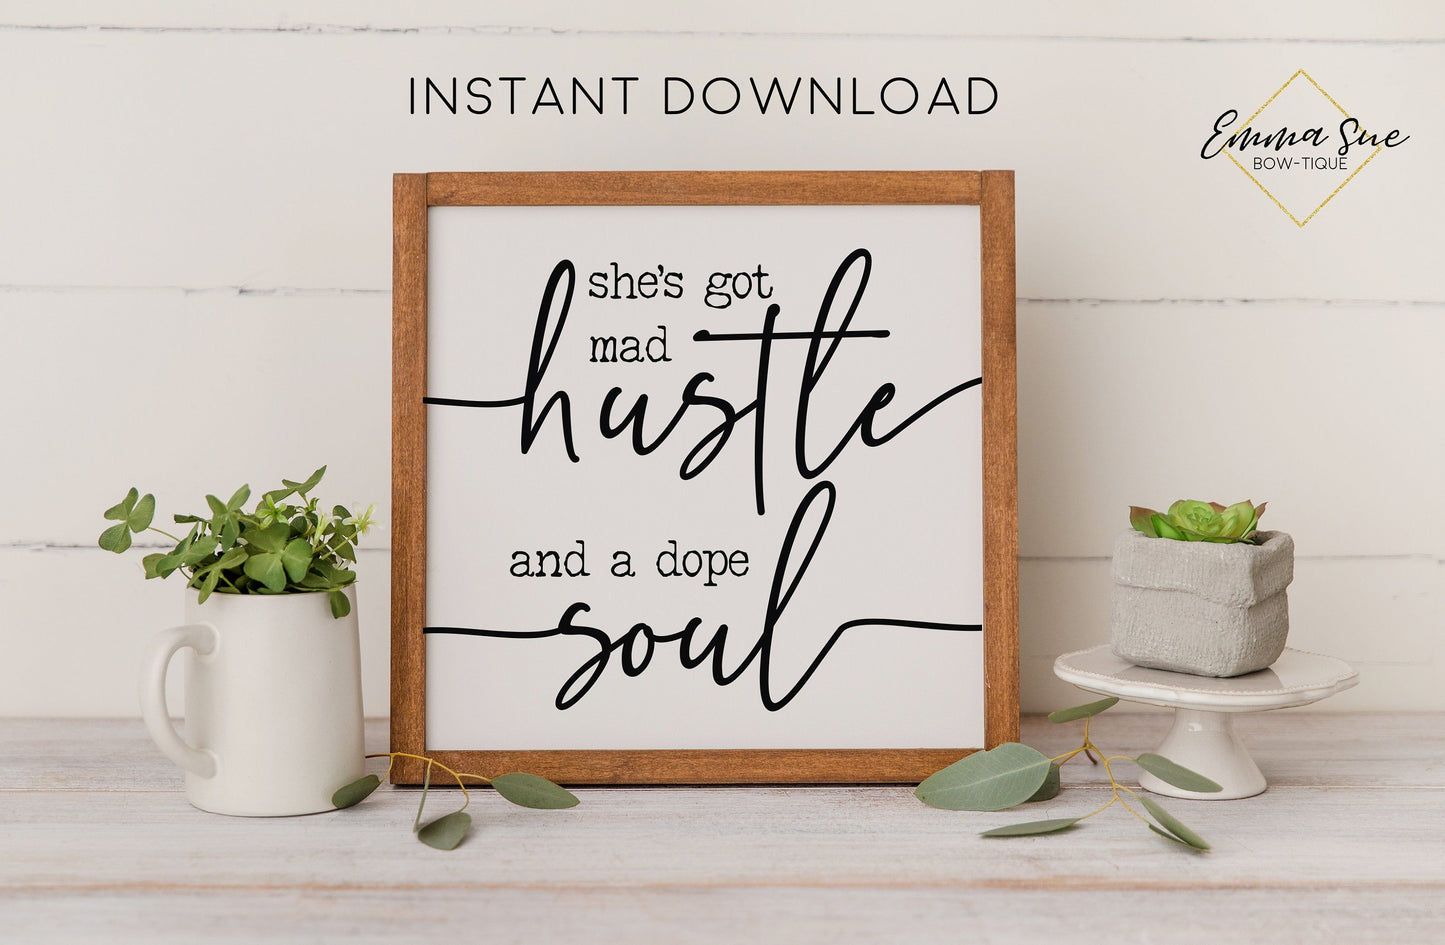 She's got mad hustle and a dope soul - Hustle quotes Boss Lady Home Office Motivational Quote Printable Sign Wall Art